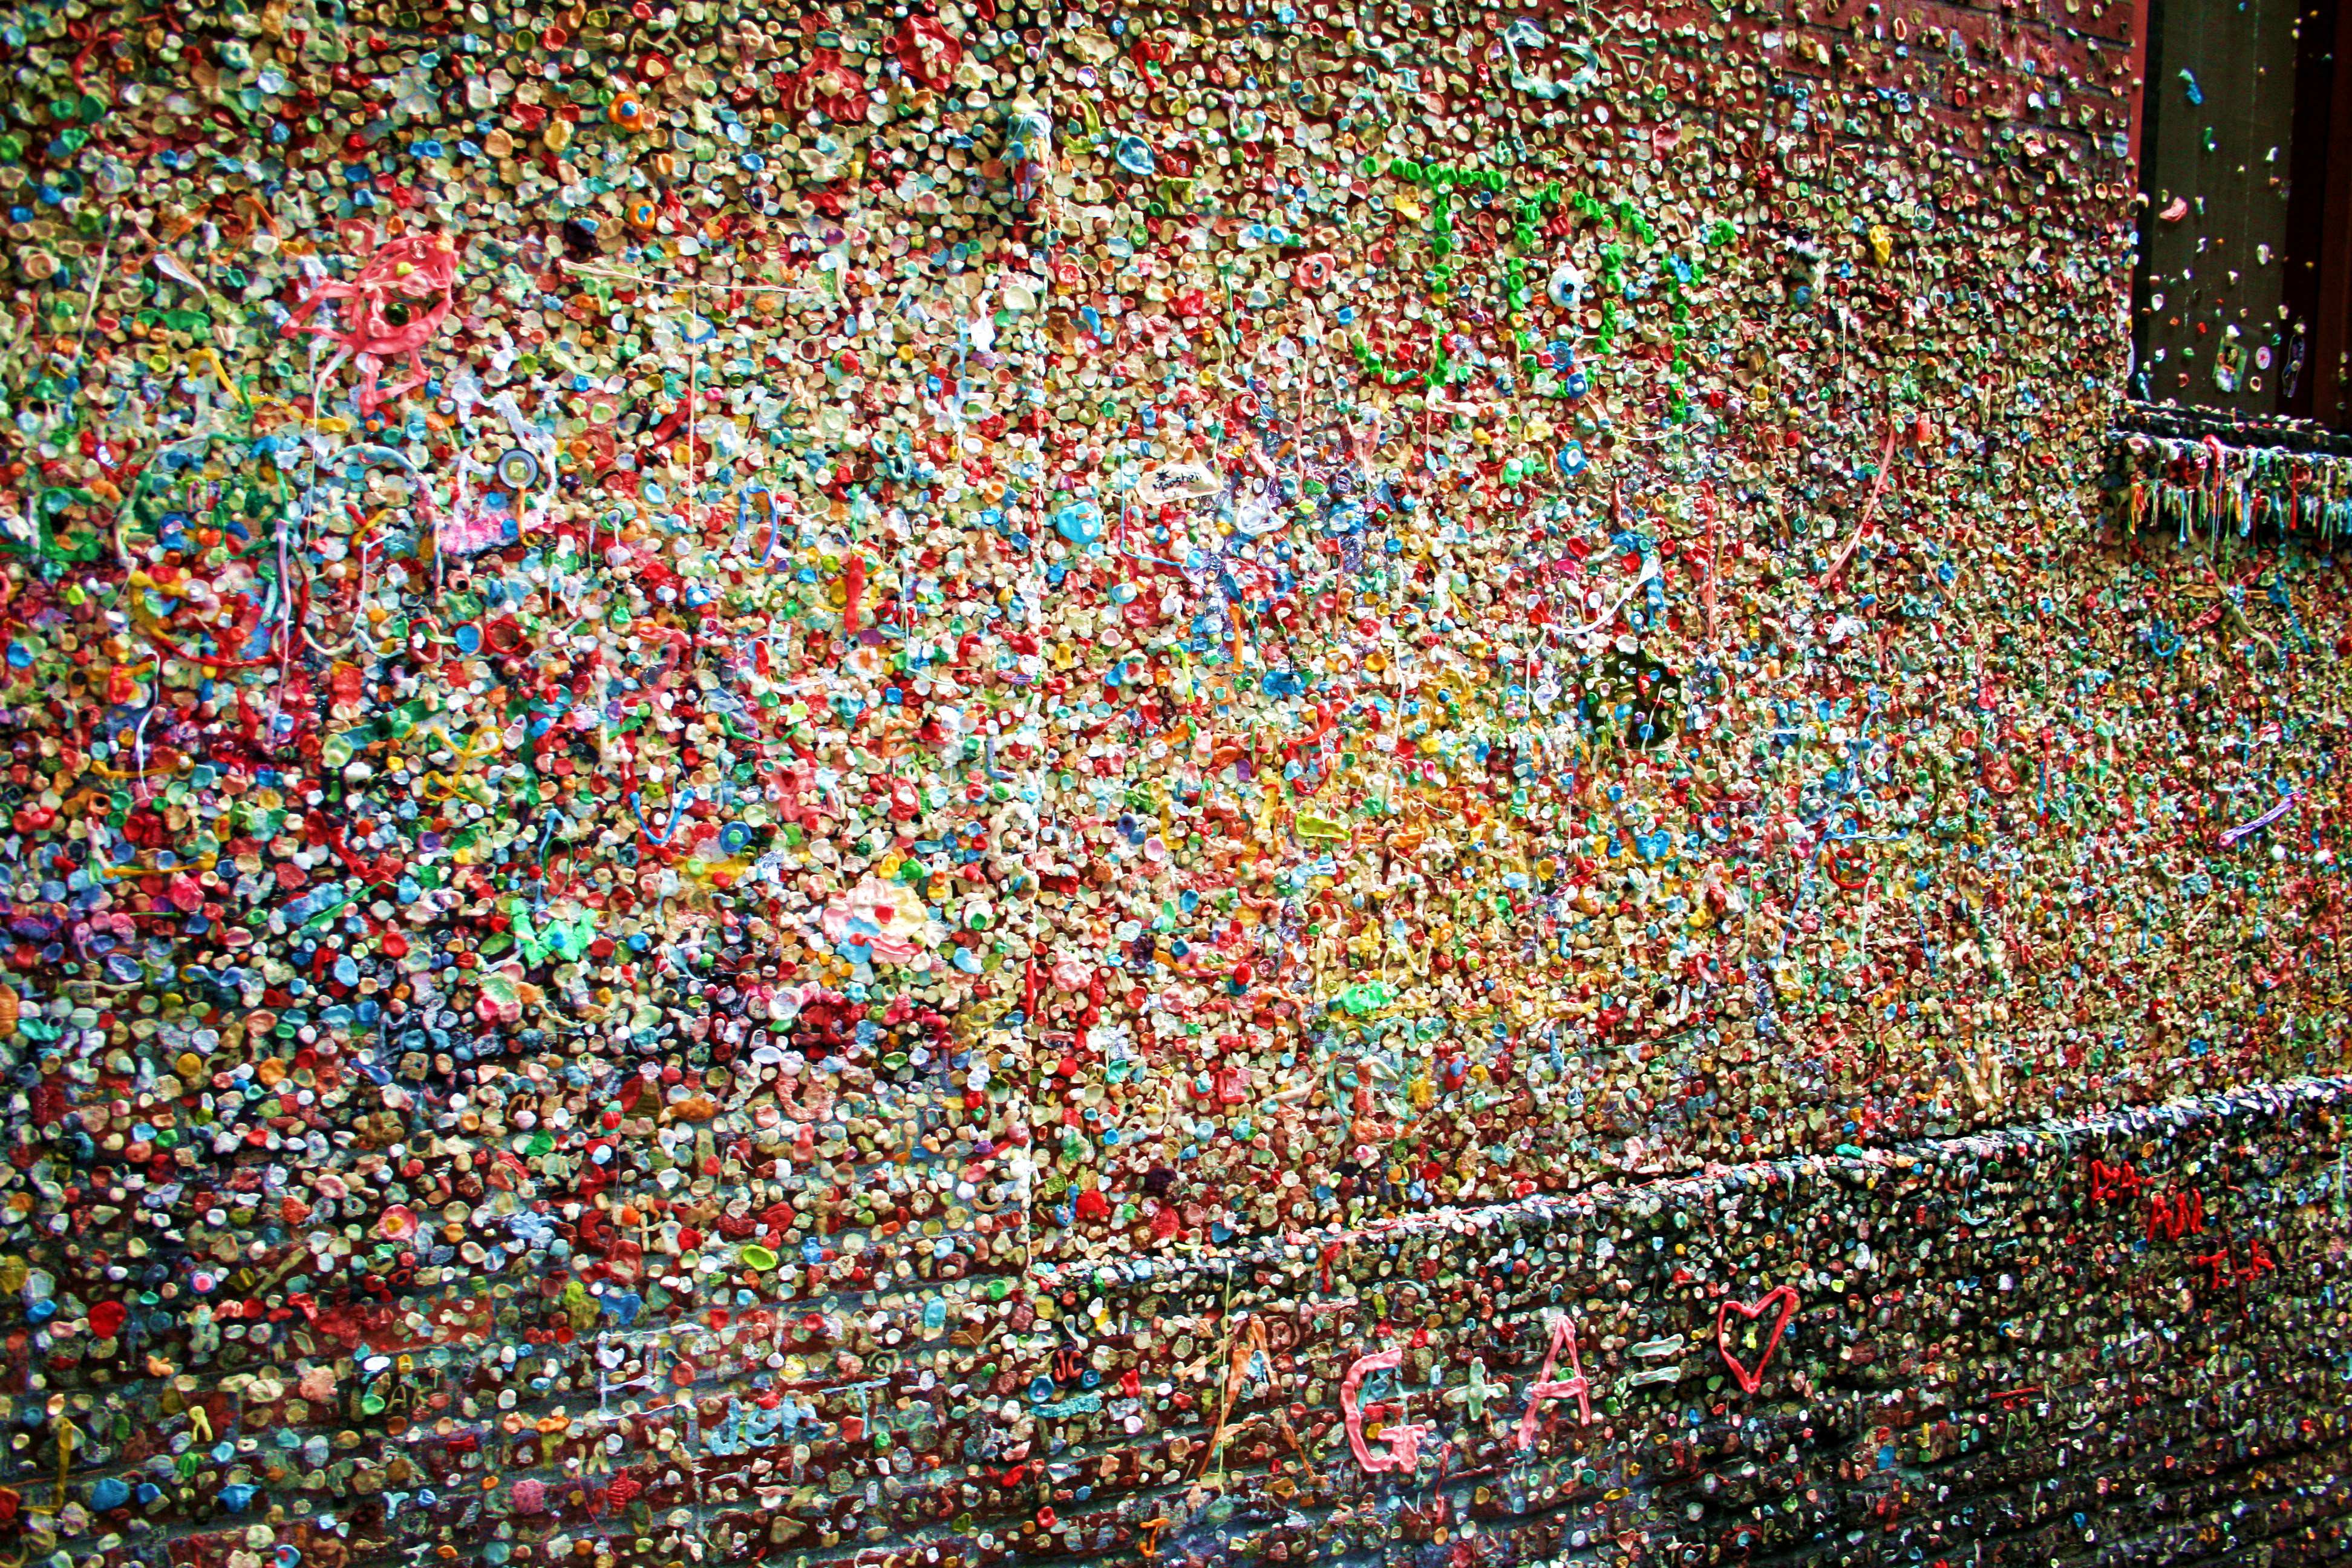 Tourists from all over the world have come to stick chewing gum to a wall on Post Alley near Pike Place Market in Seattle. (Barcroft Media— Getty Images)